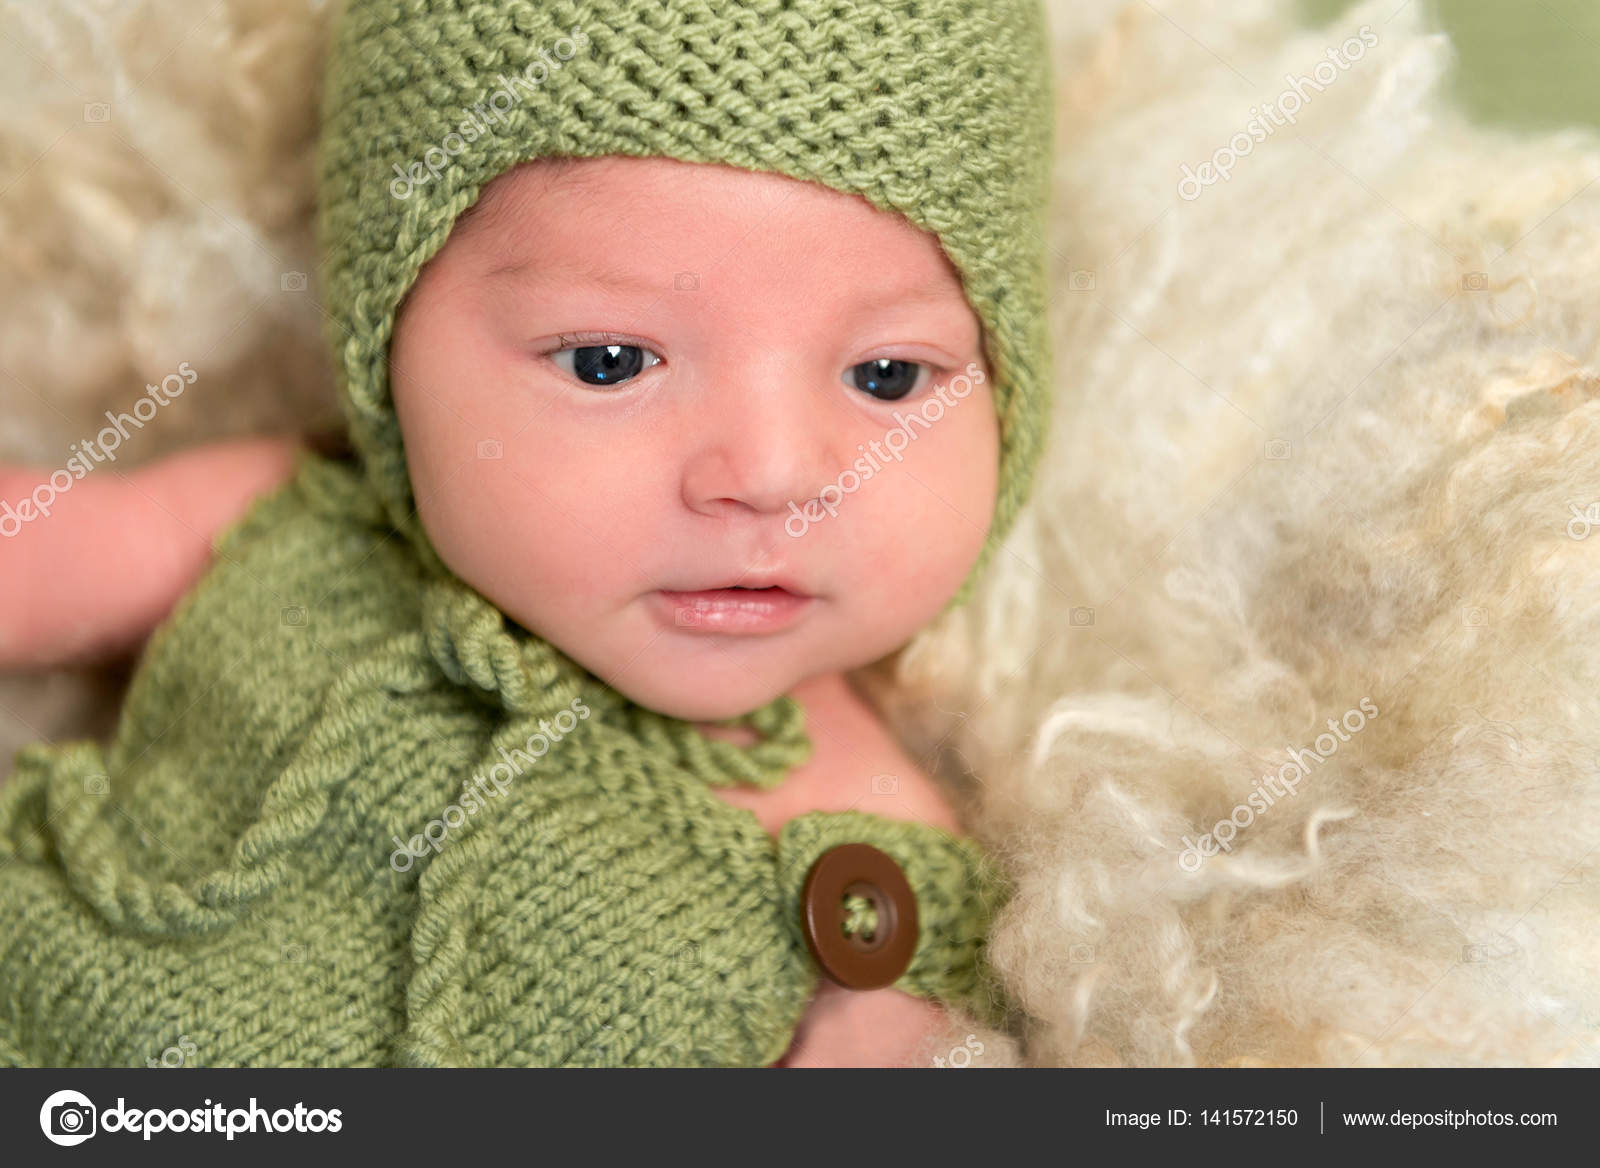 Baby in a knitted green outfit, closeup Stock Photo by ©tan4ikk